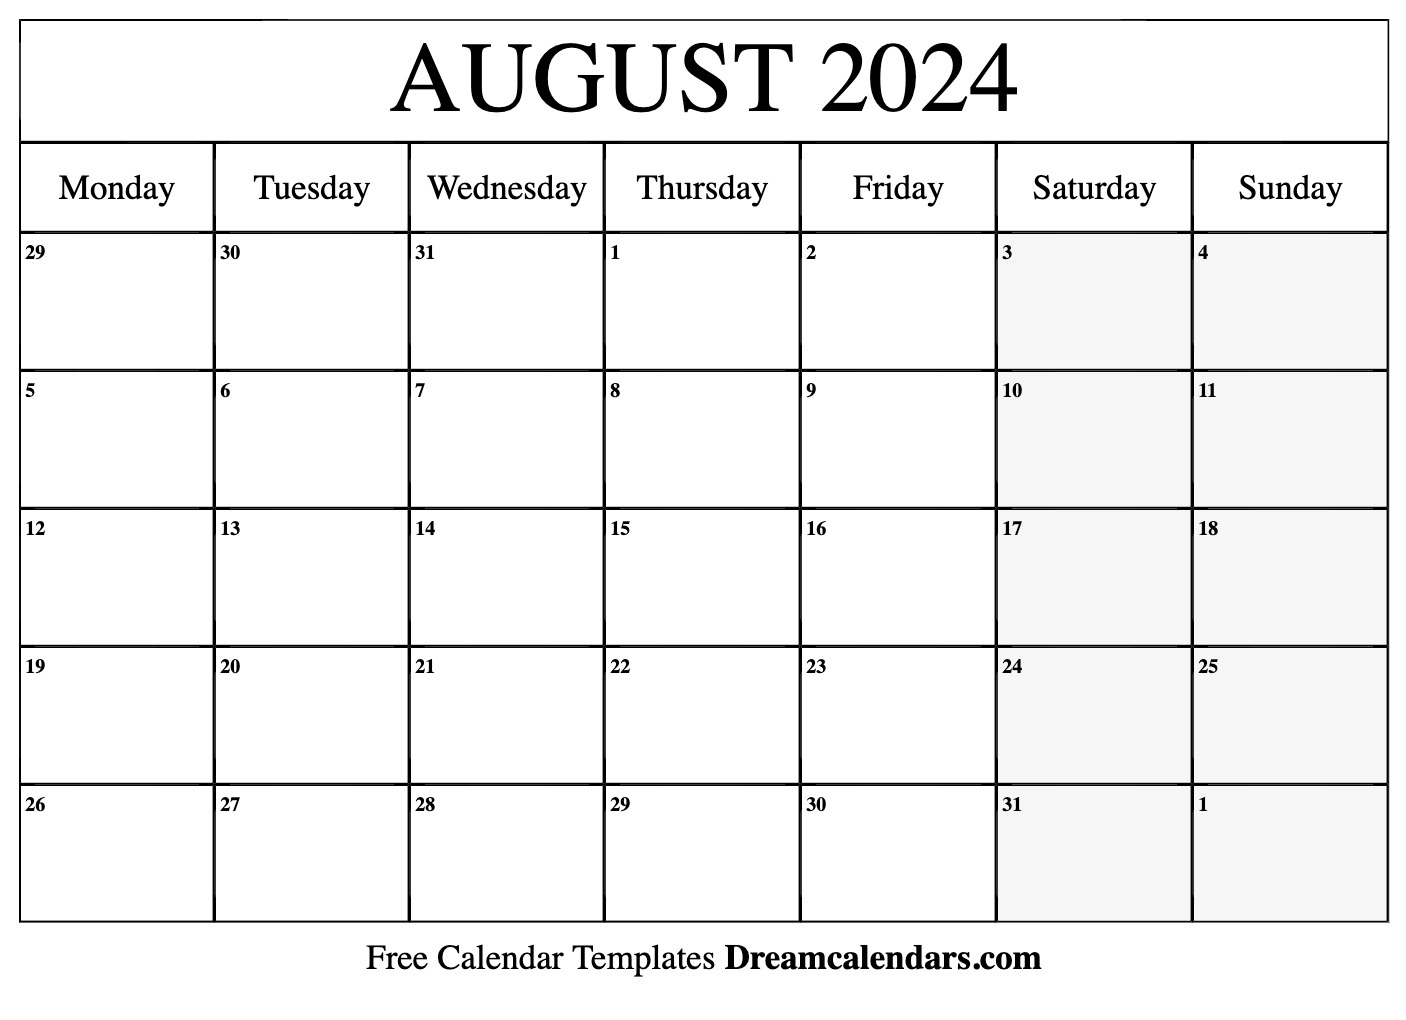 August 2024 Calendar | Free Blank Printable With Holidays regarding Free Printable Calendar August 2024 To August 2024